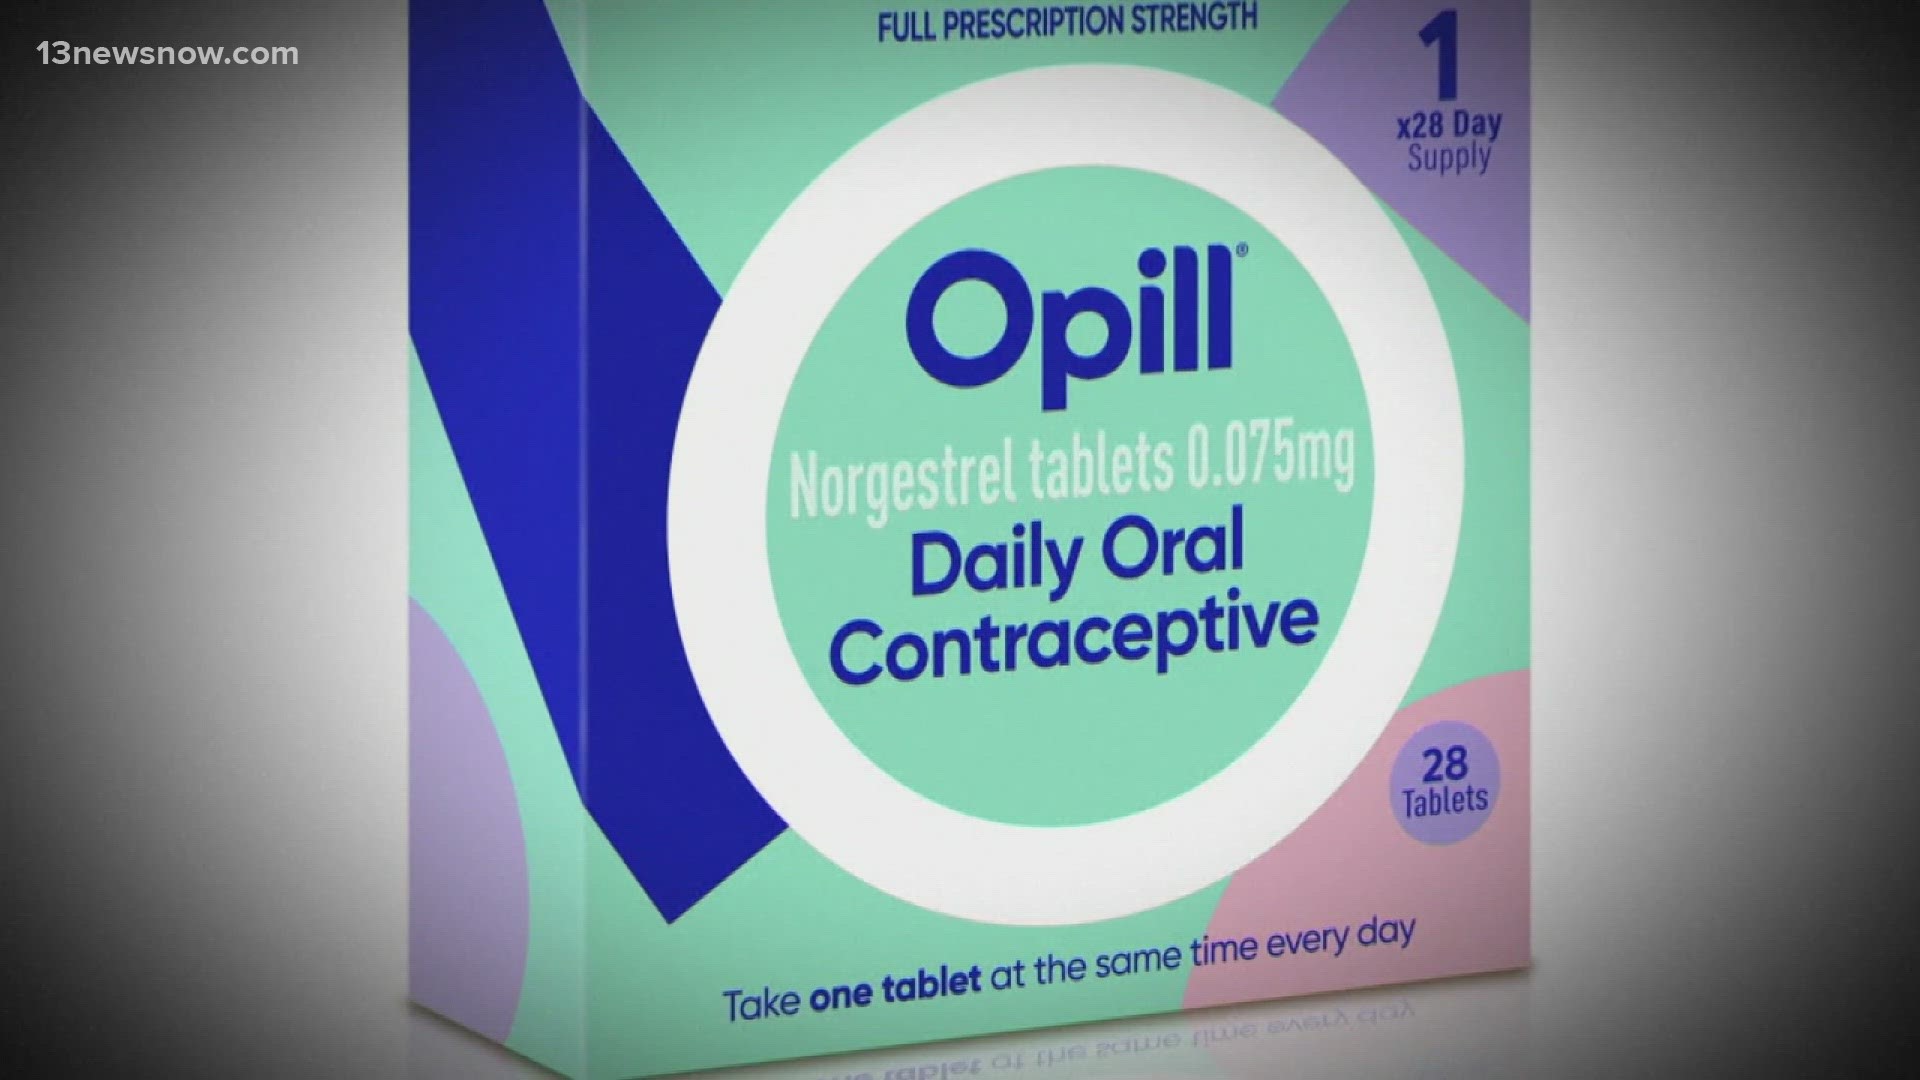 . With about 3 million unintended pregnancies in the U.S. per year, the FDA says the new OPill will help cut down that number.